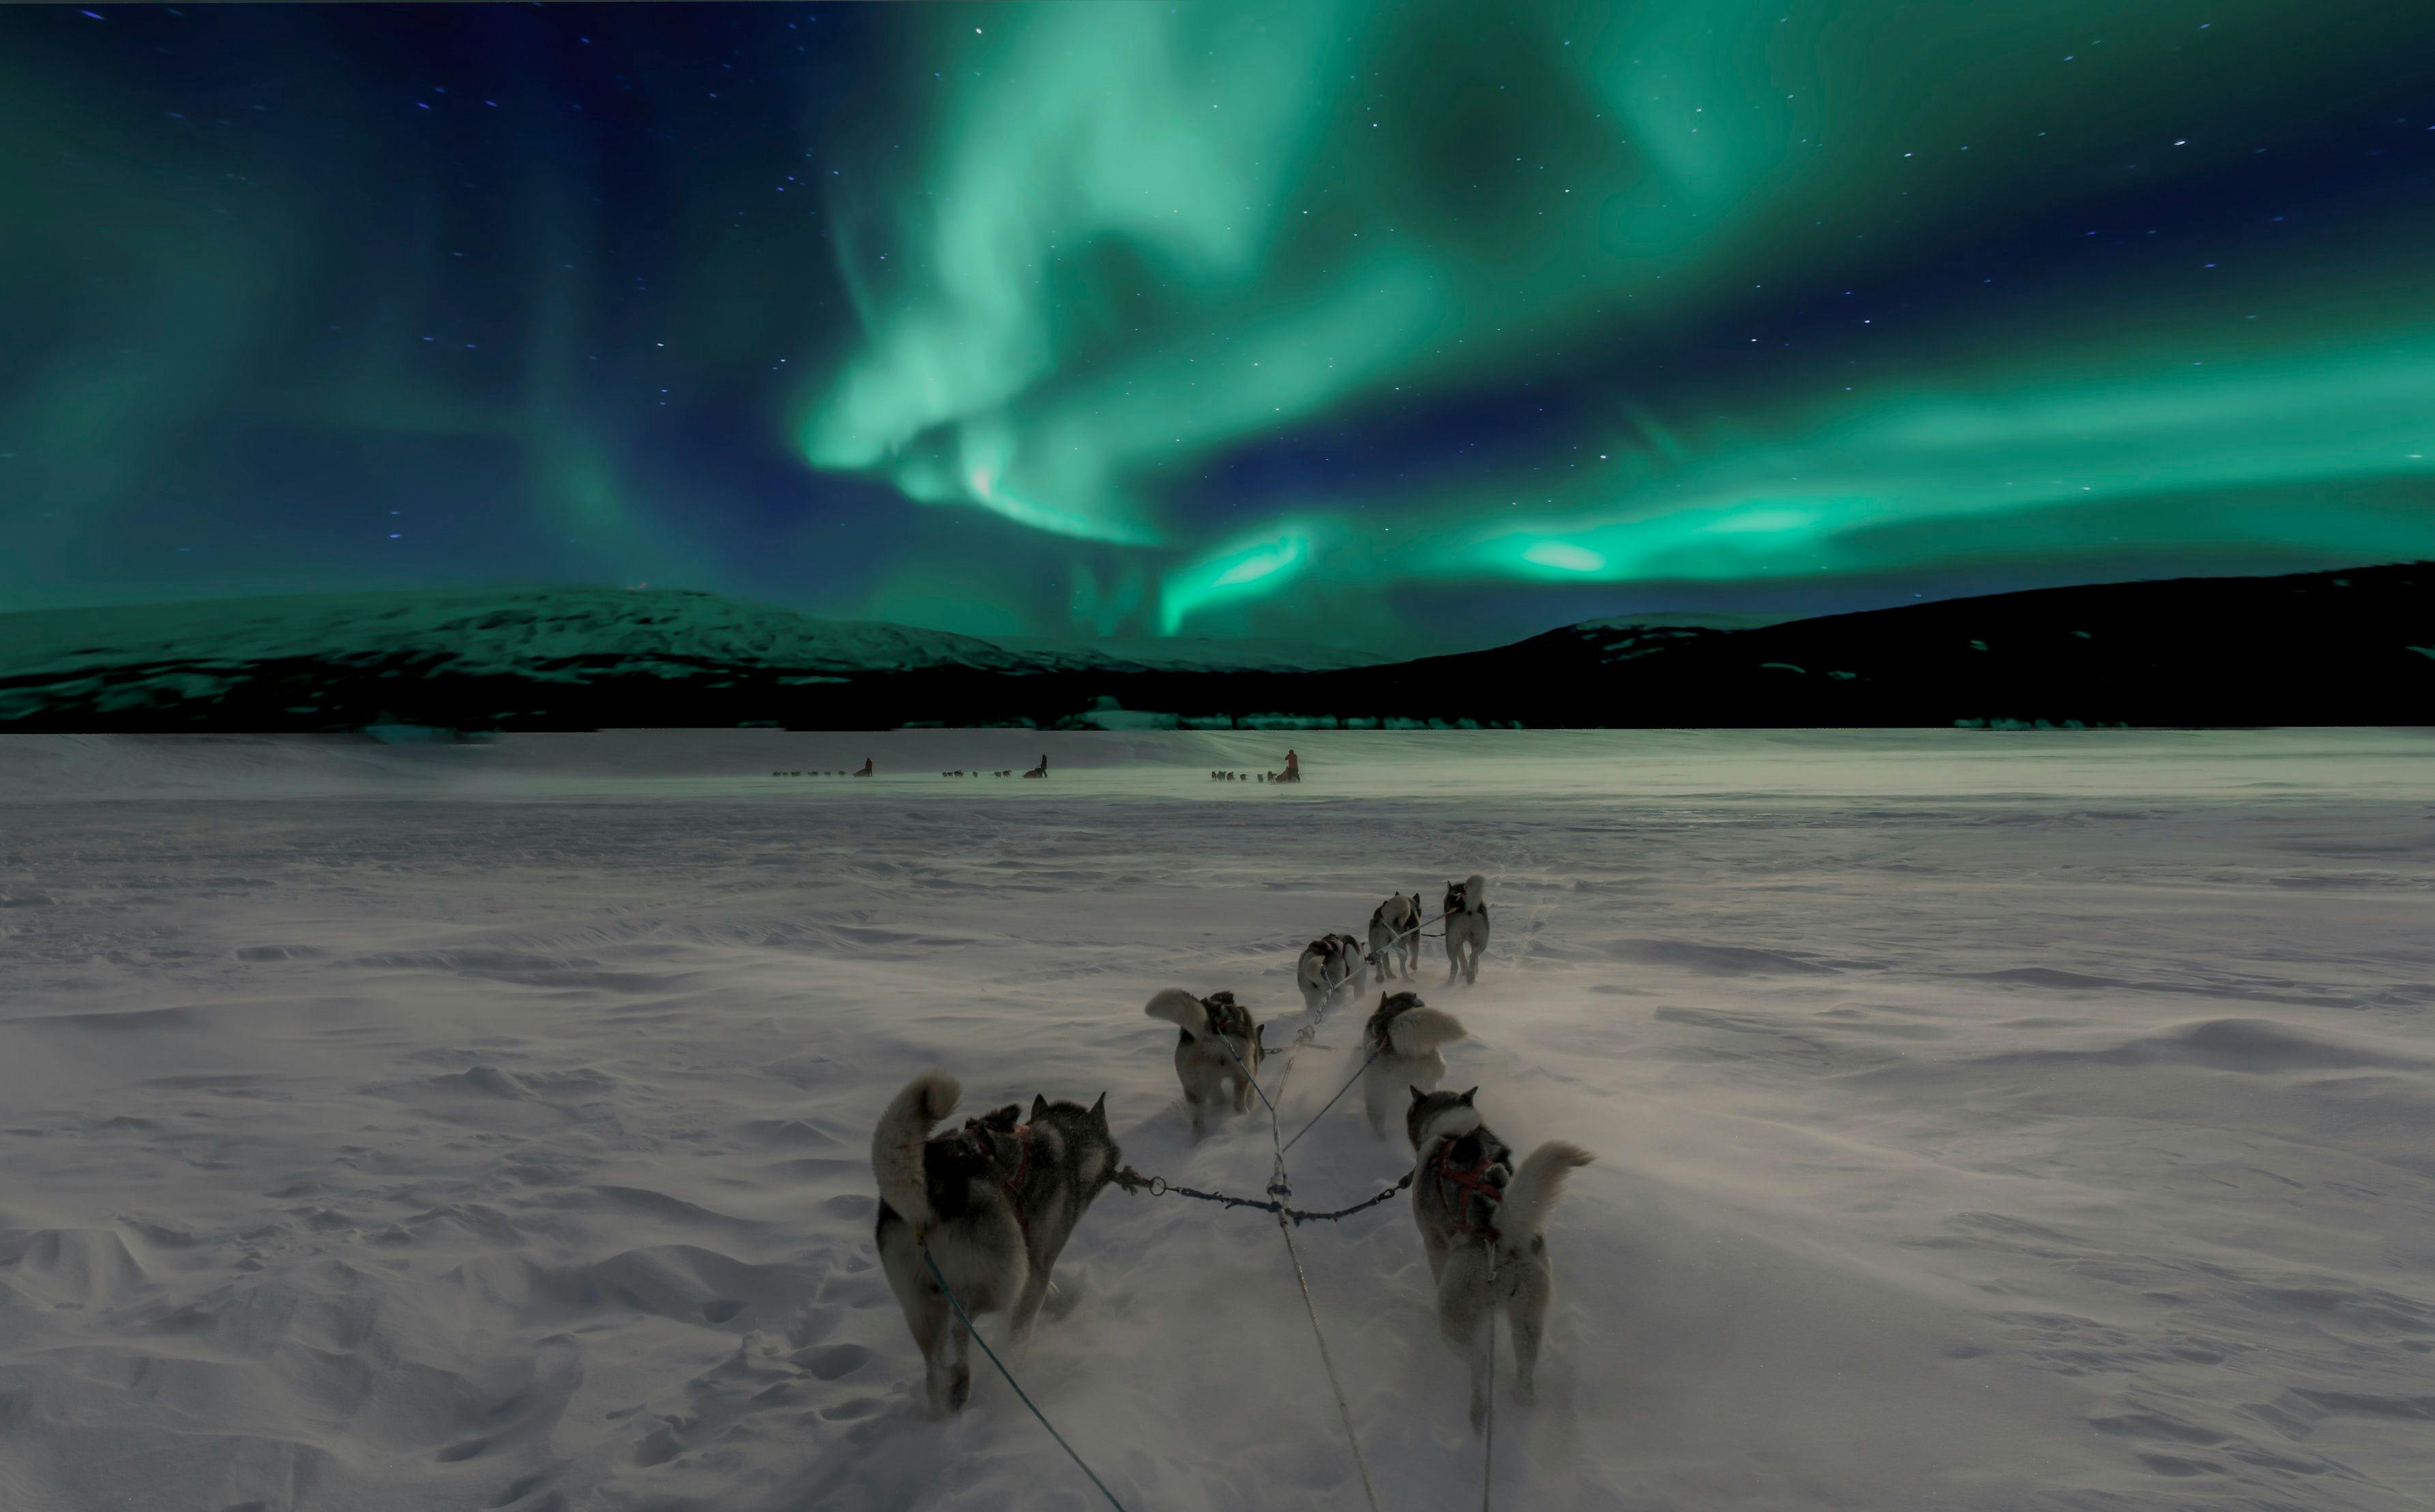 Dogs with a sledge on a snowy field in Norway.